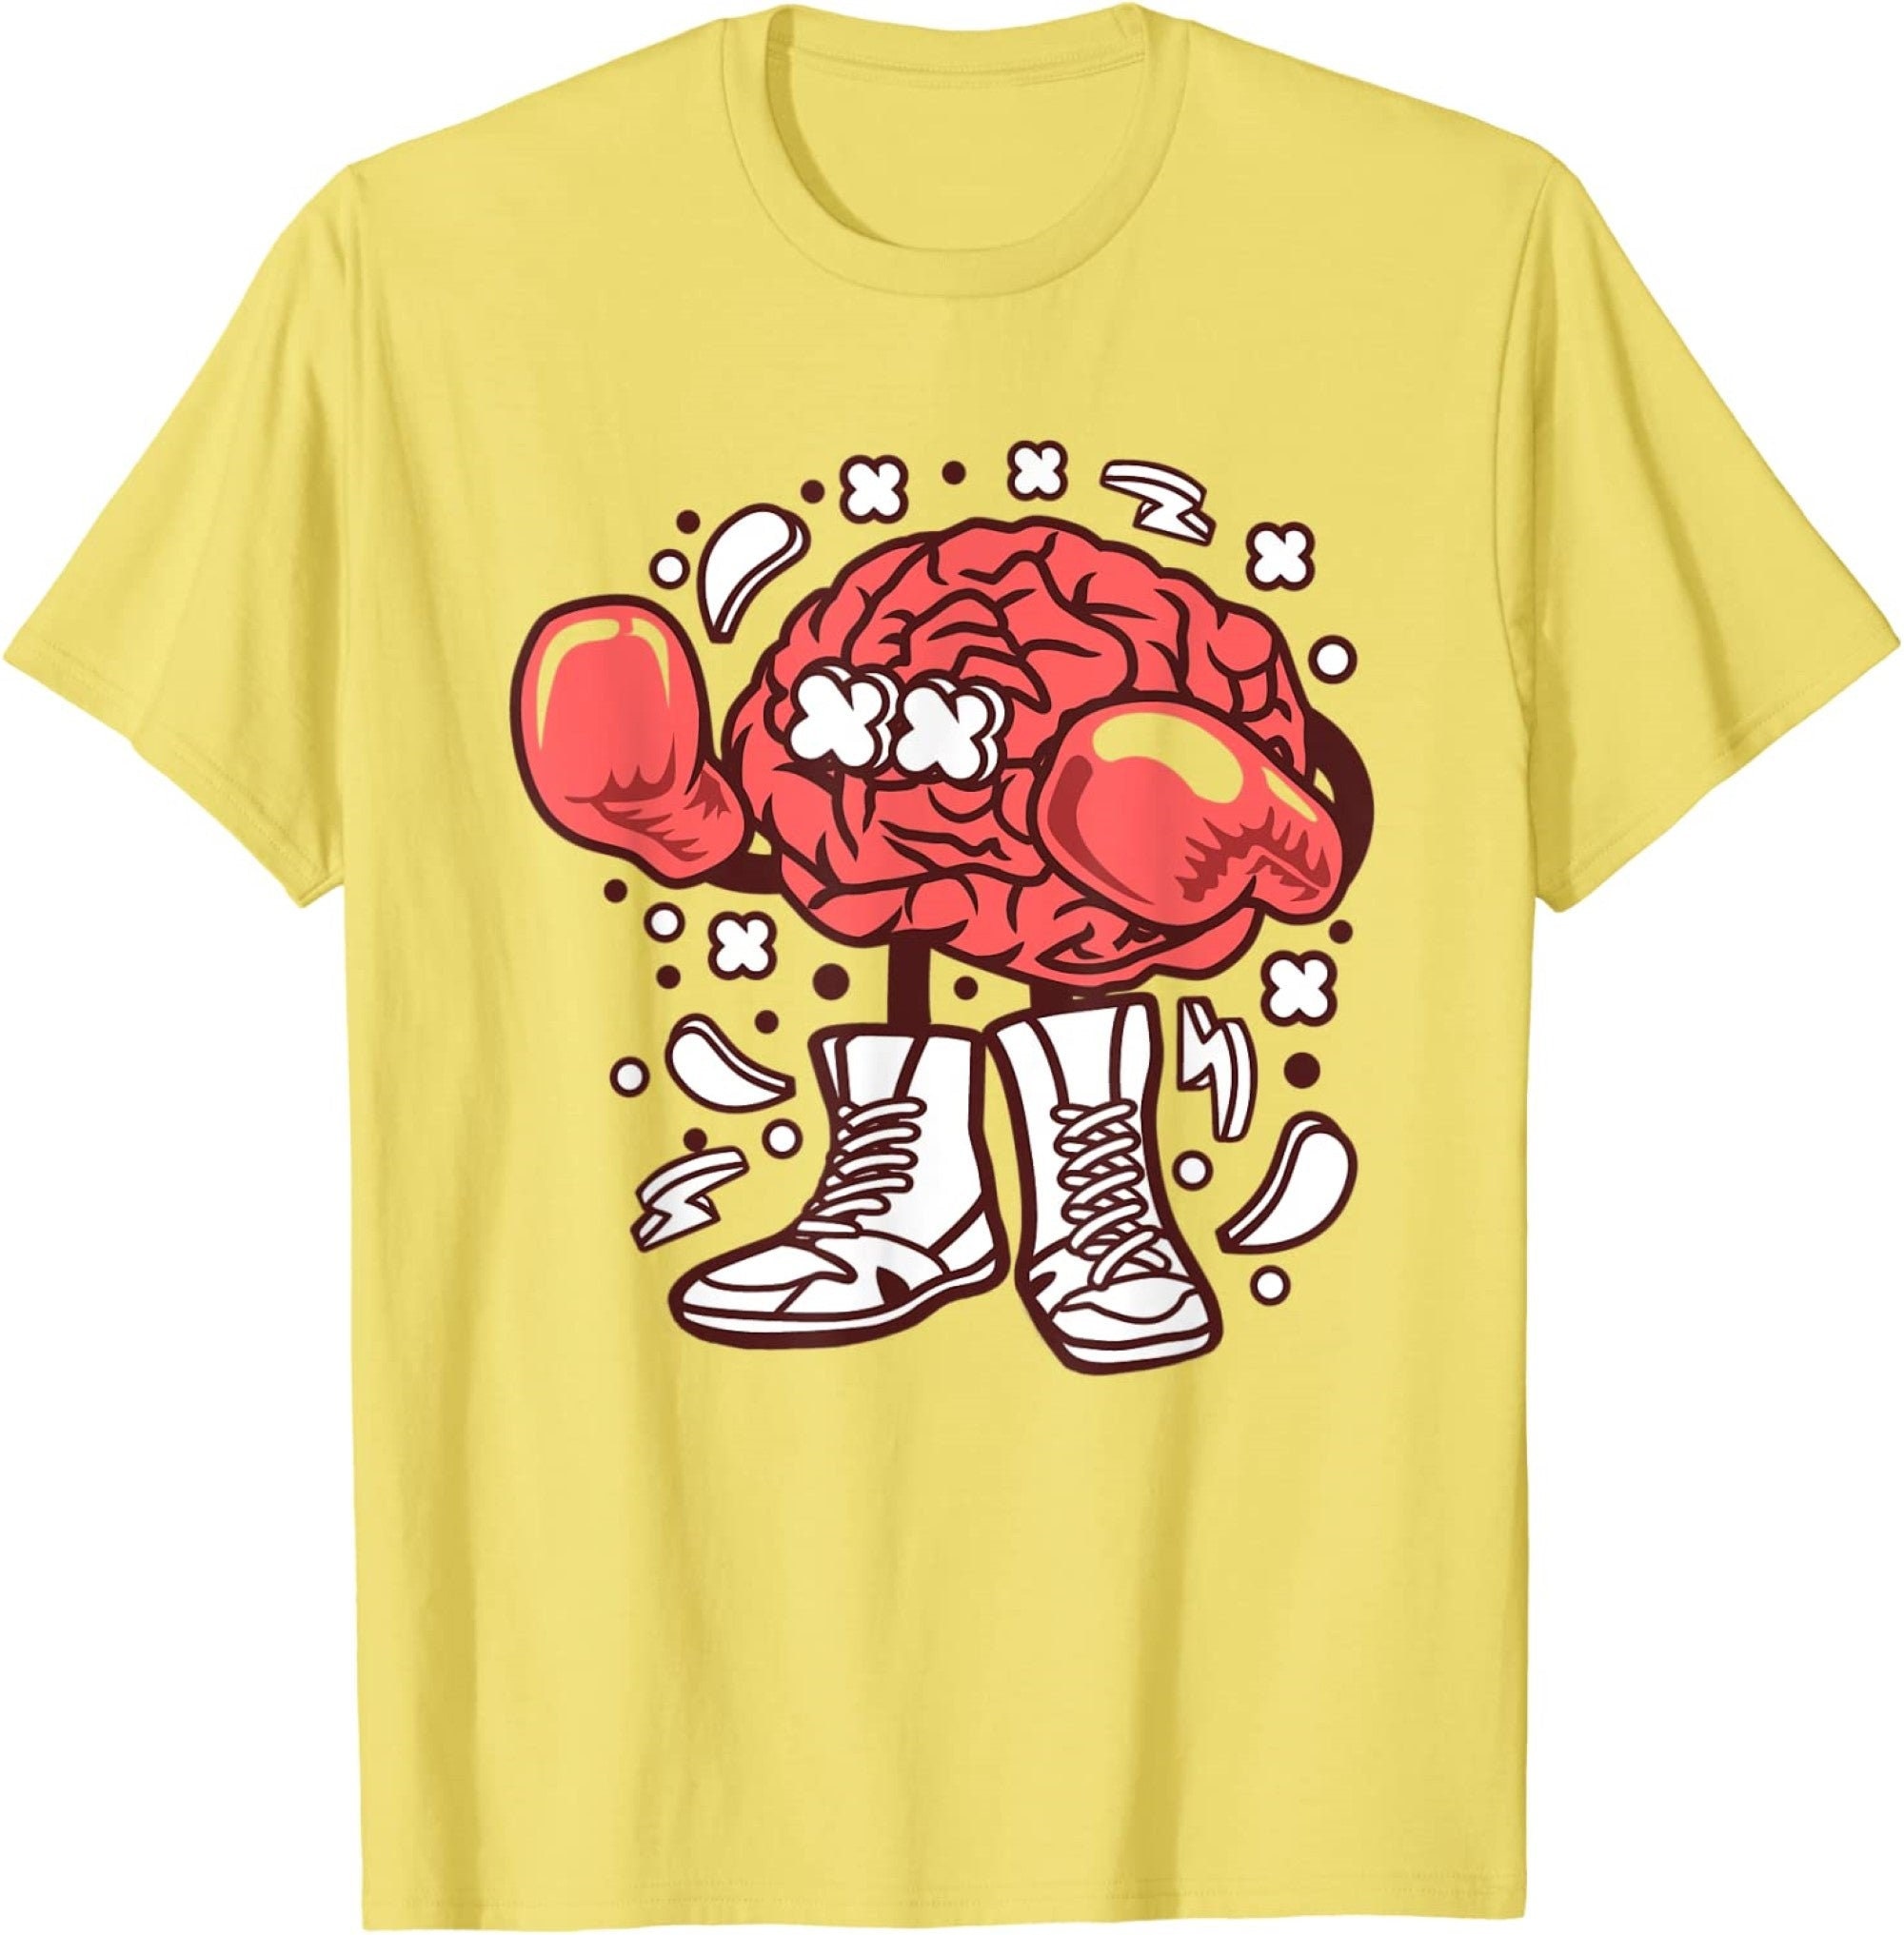 Discover Boxer Brain Fighter Boxing T-Shirt